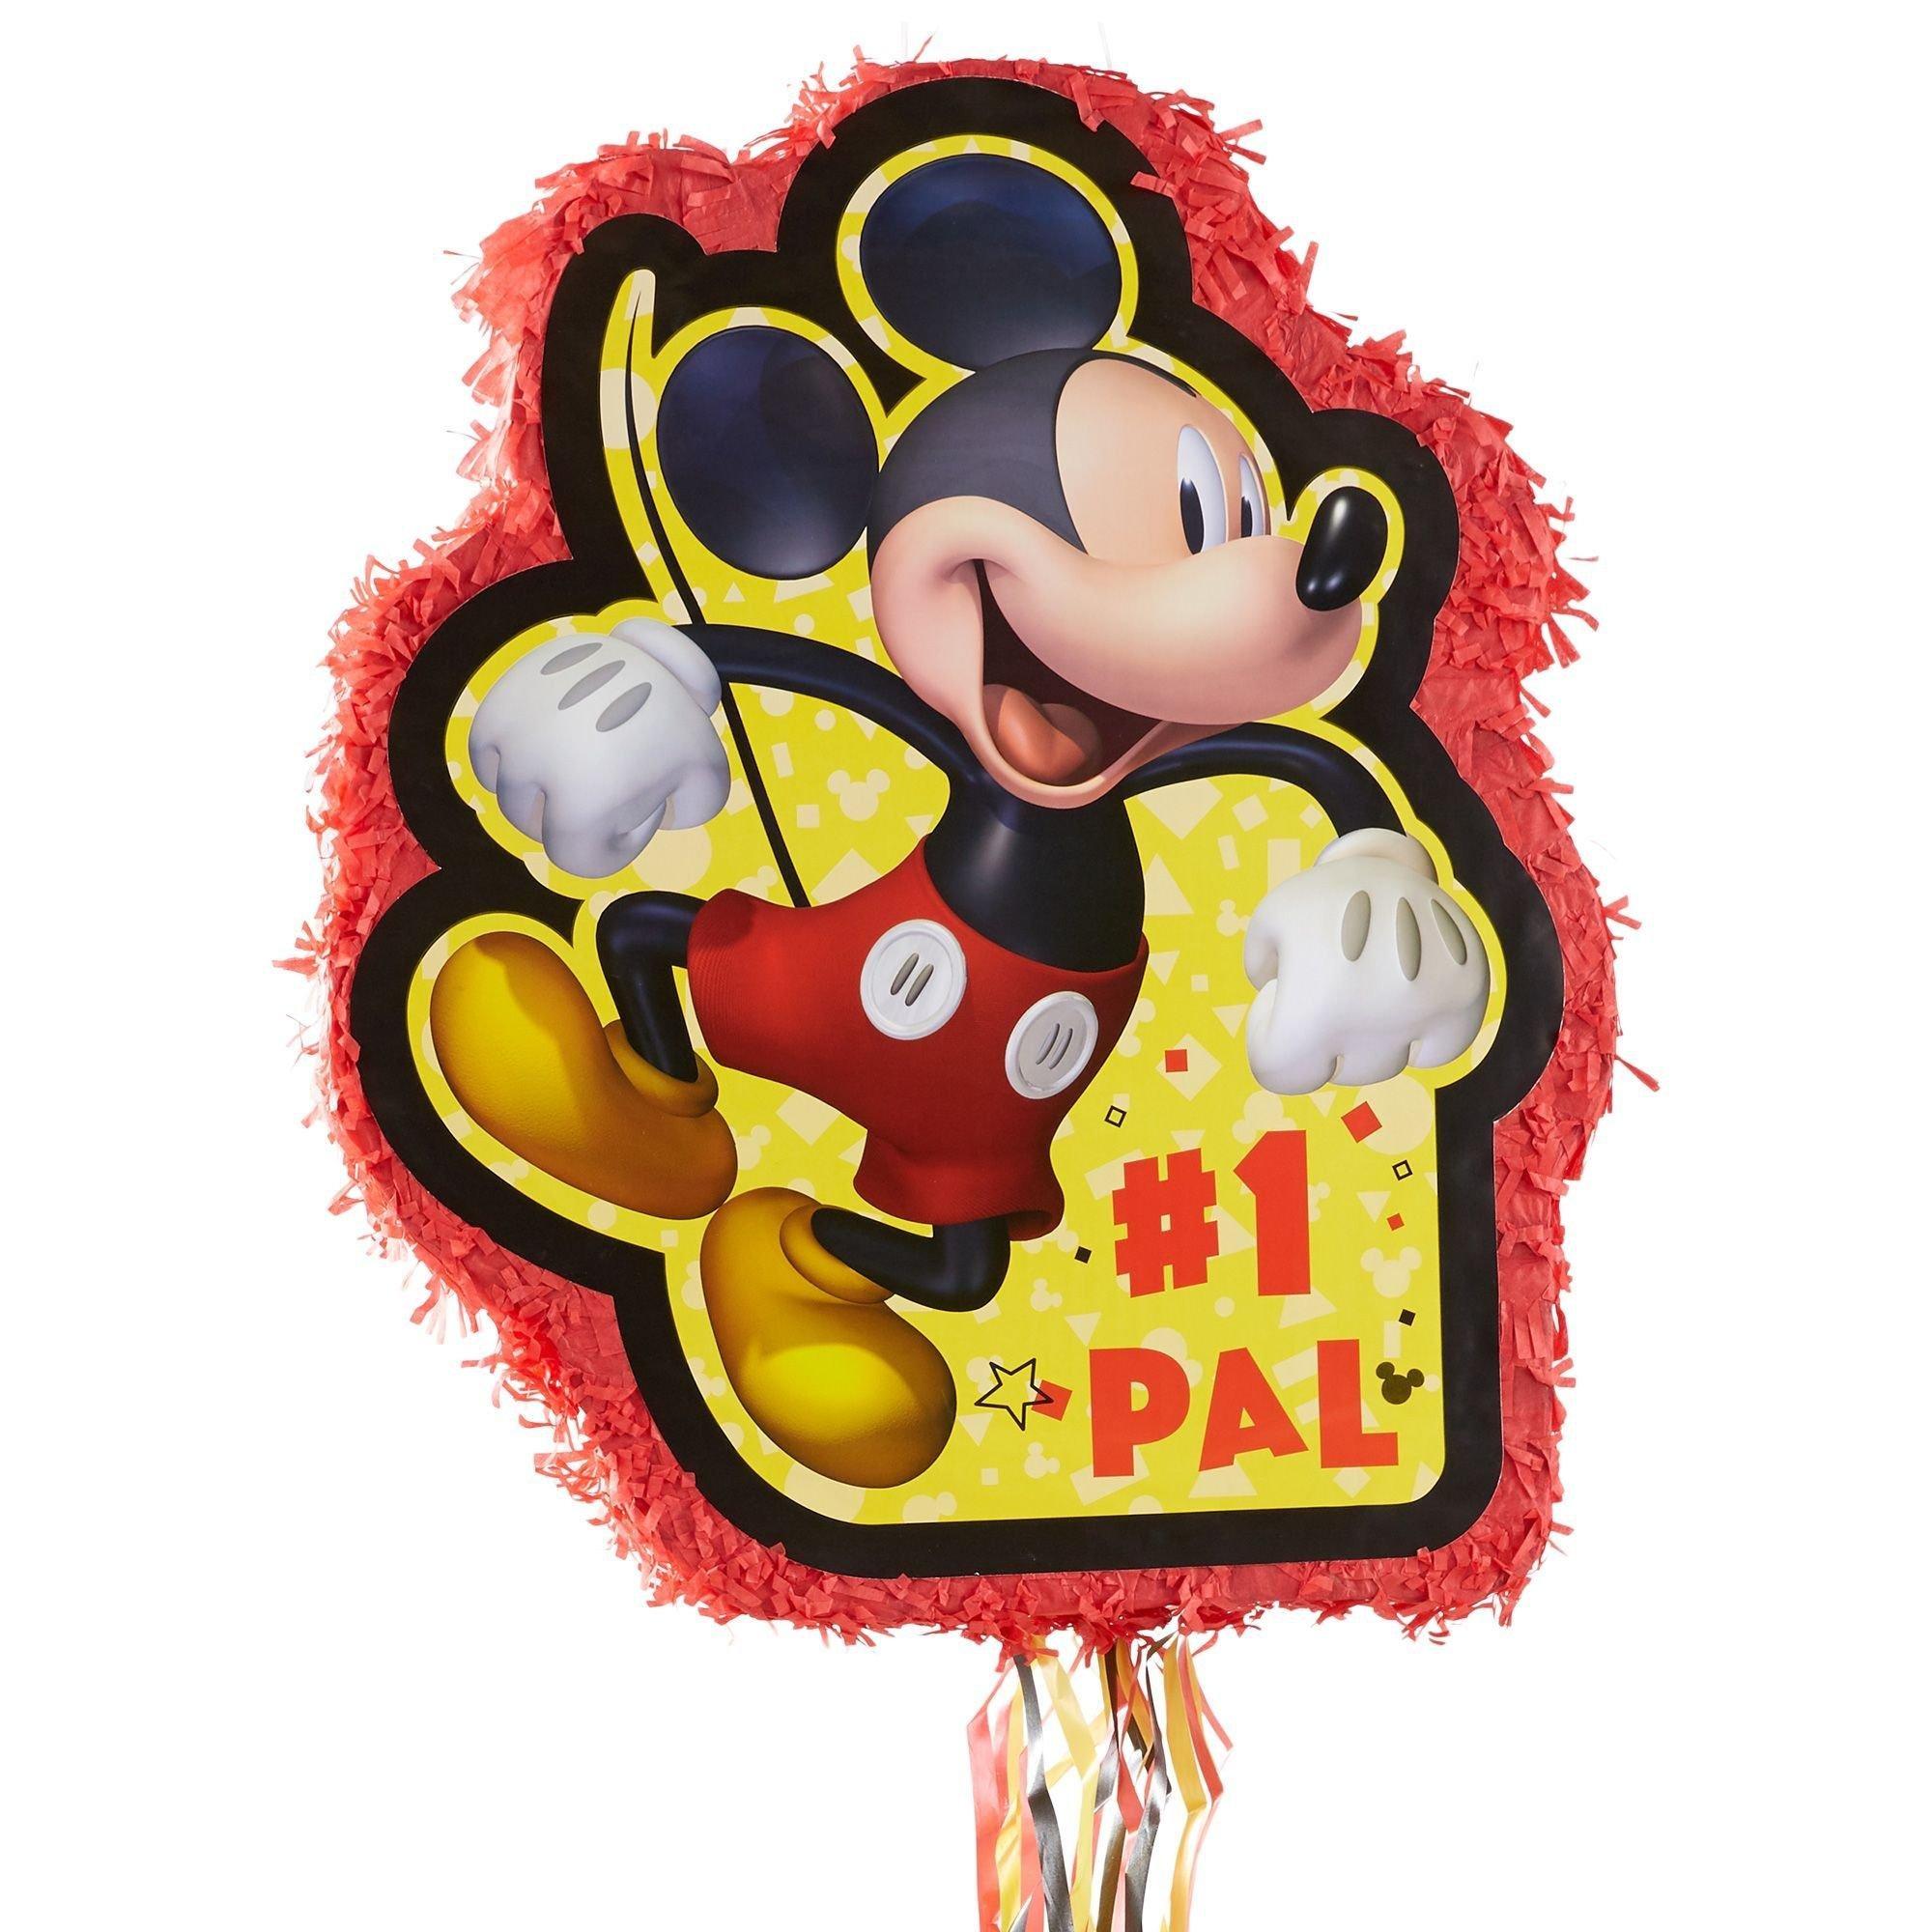 The Pull String Mickey Mouse Forever Pinata Kit with Favors makes